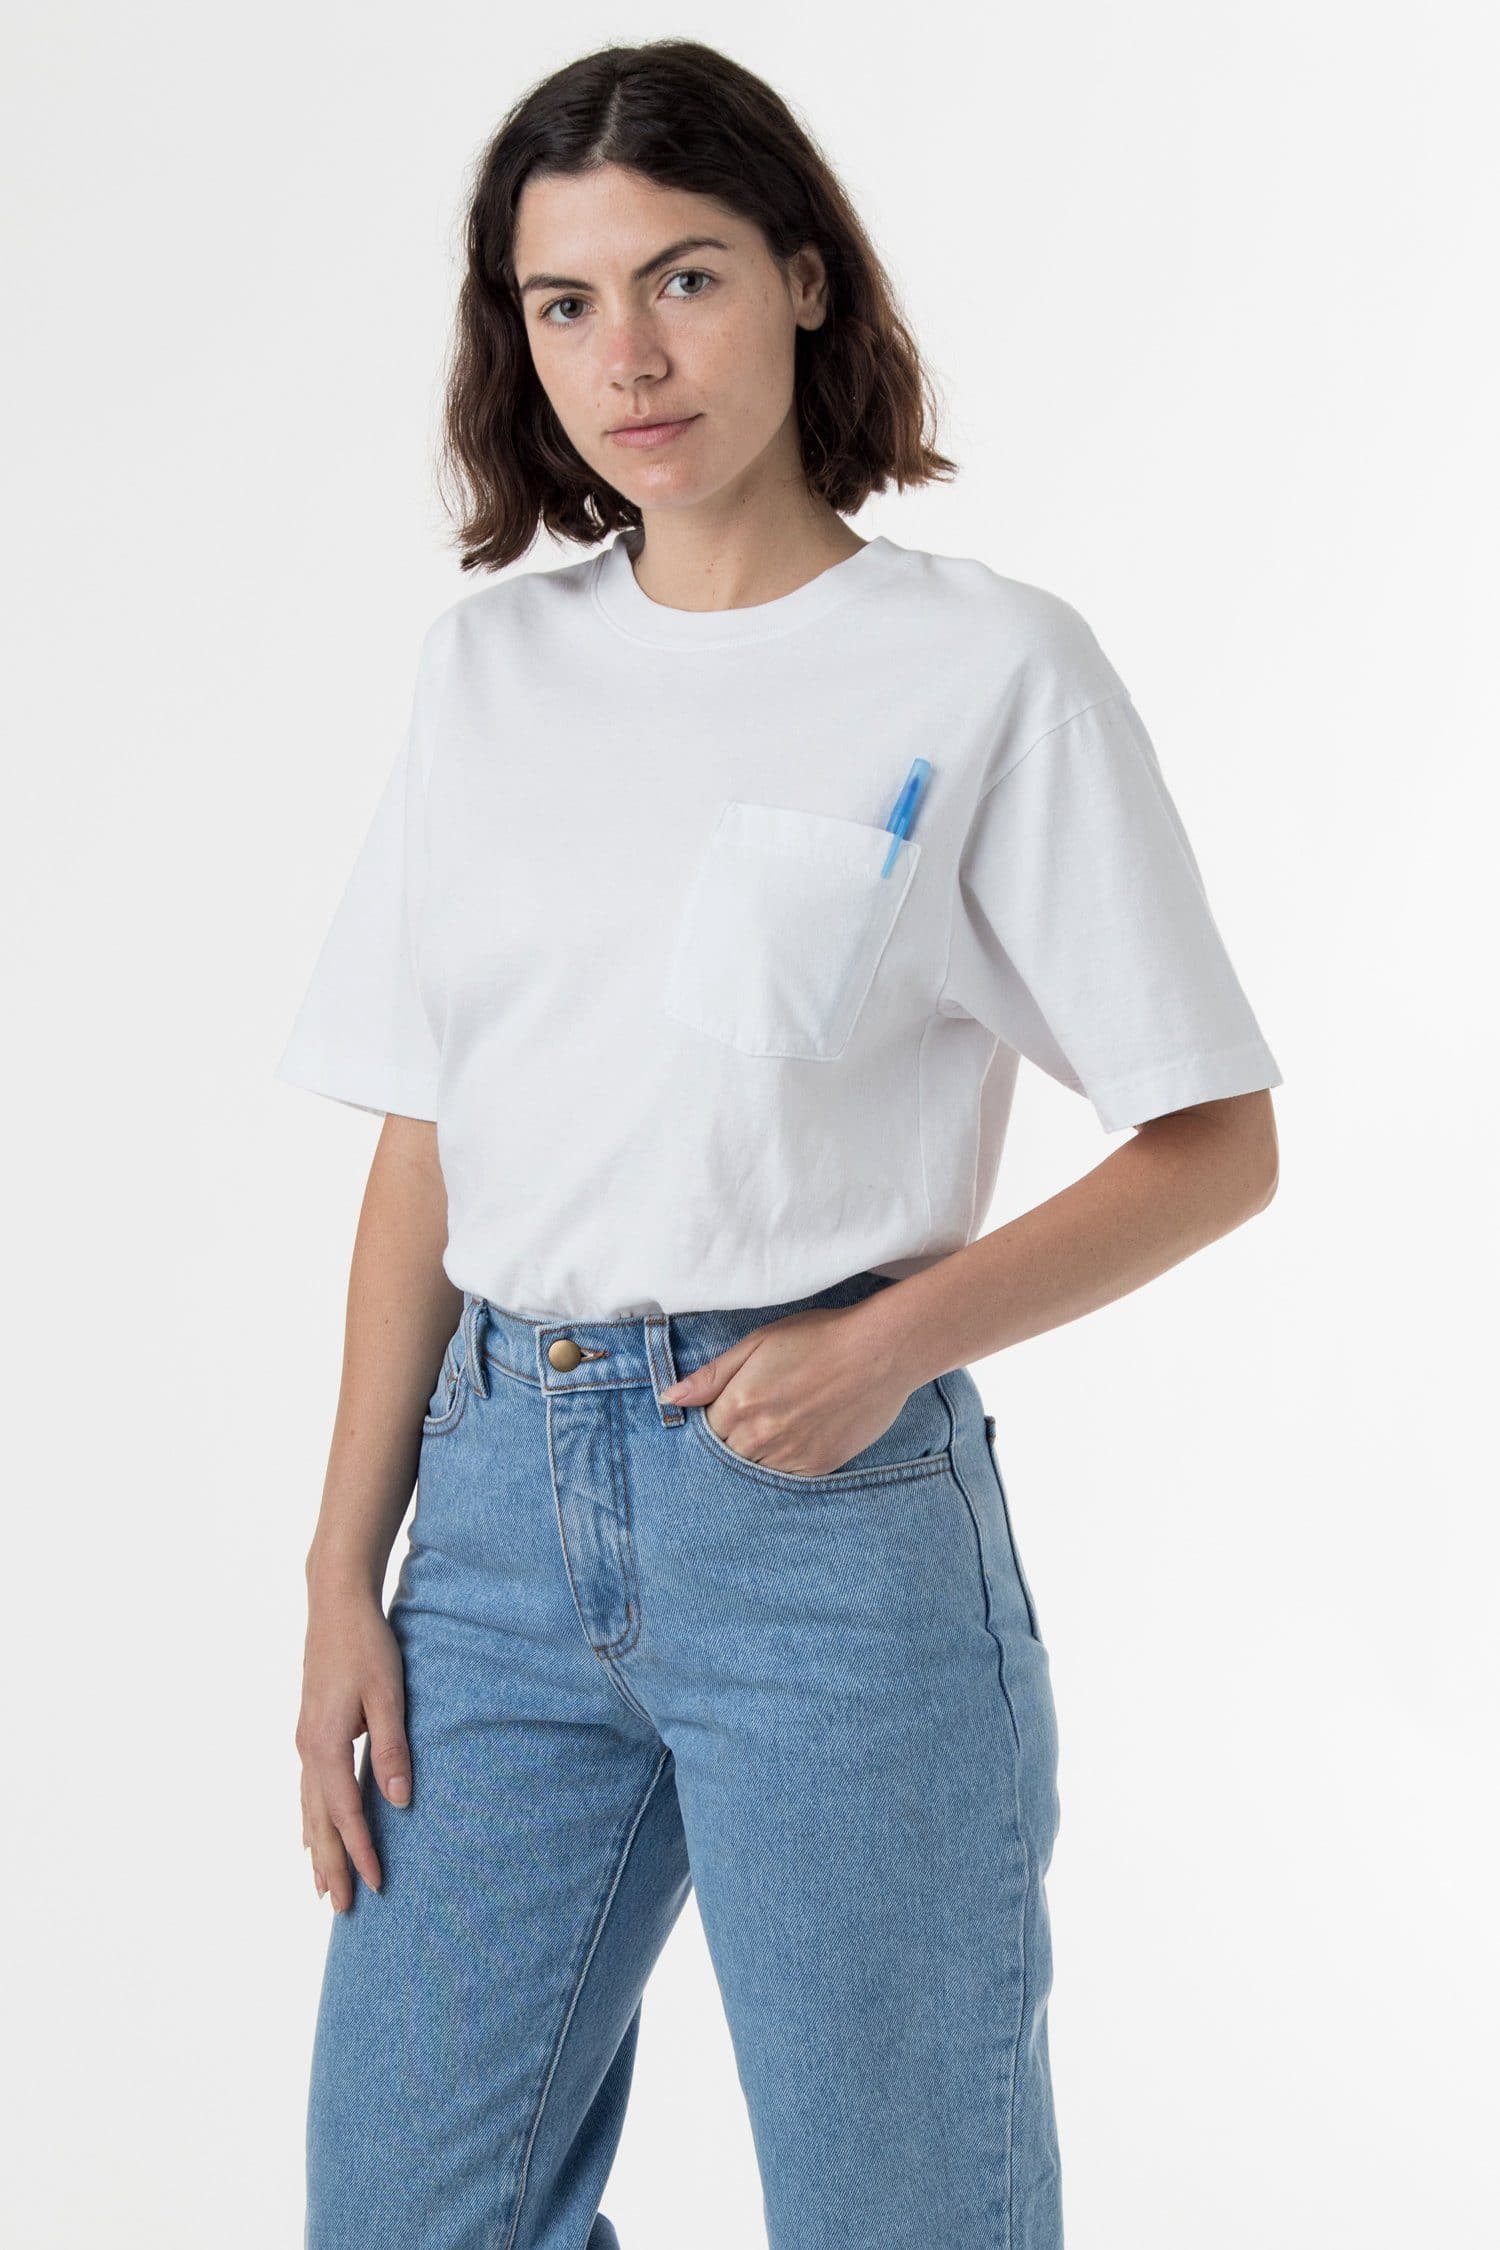 Los Angeles Apparel | Shirt for Women in White, Size Medium